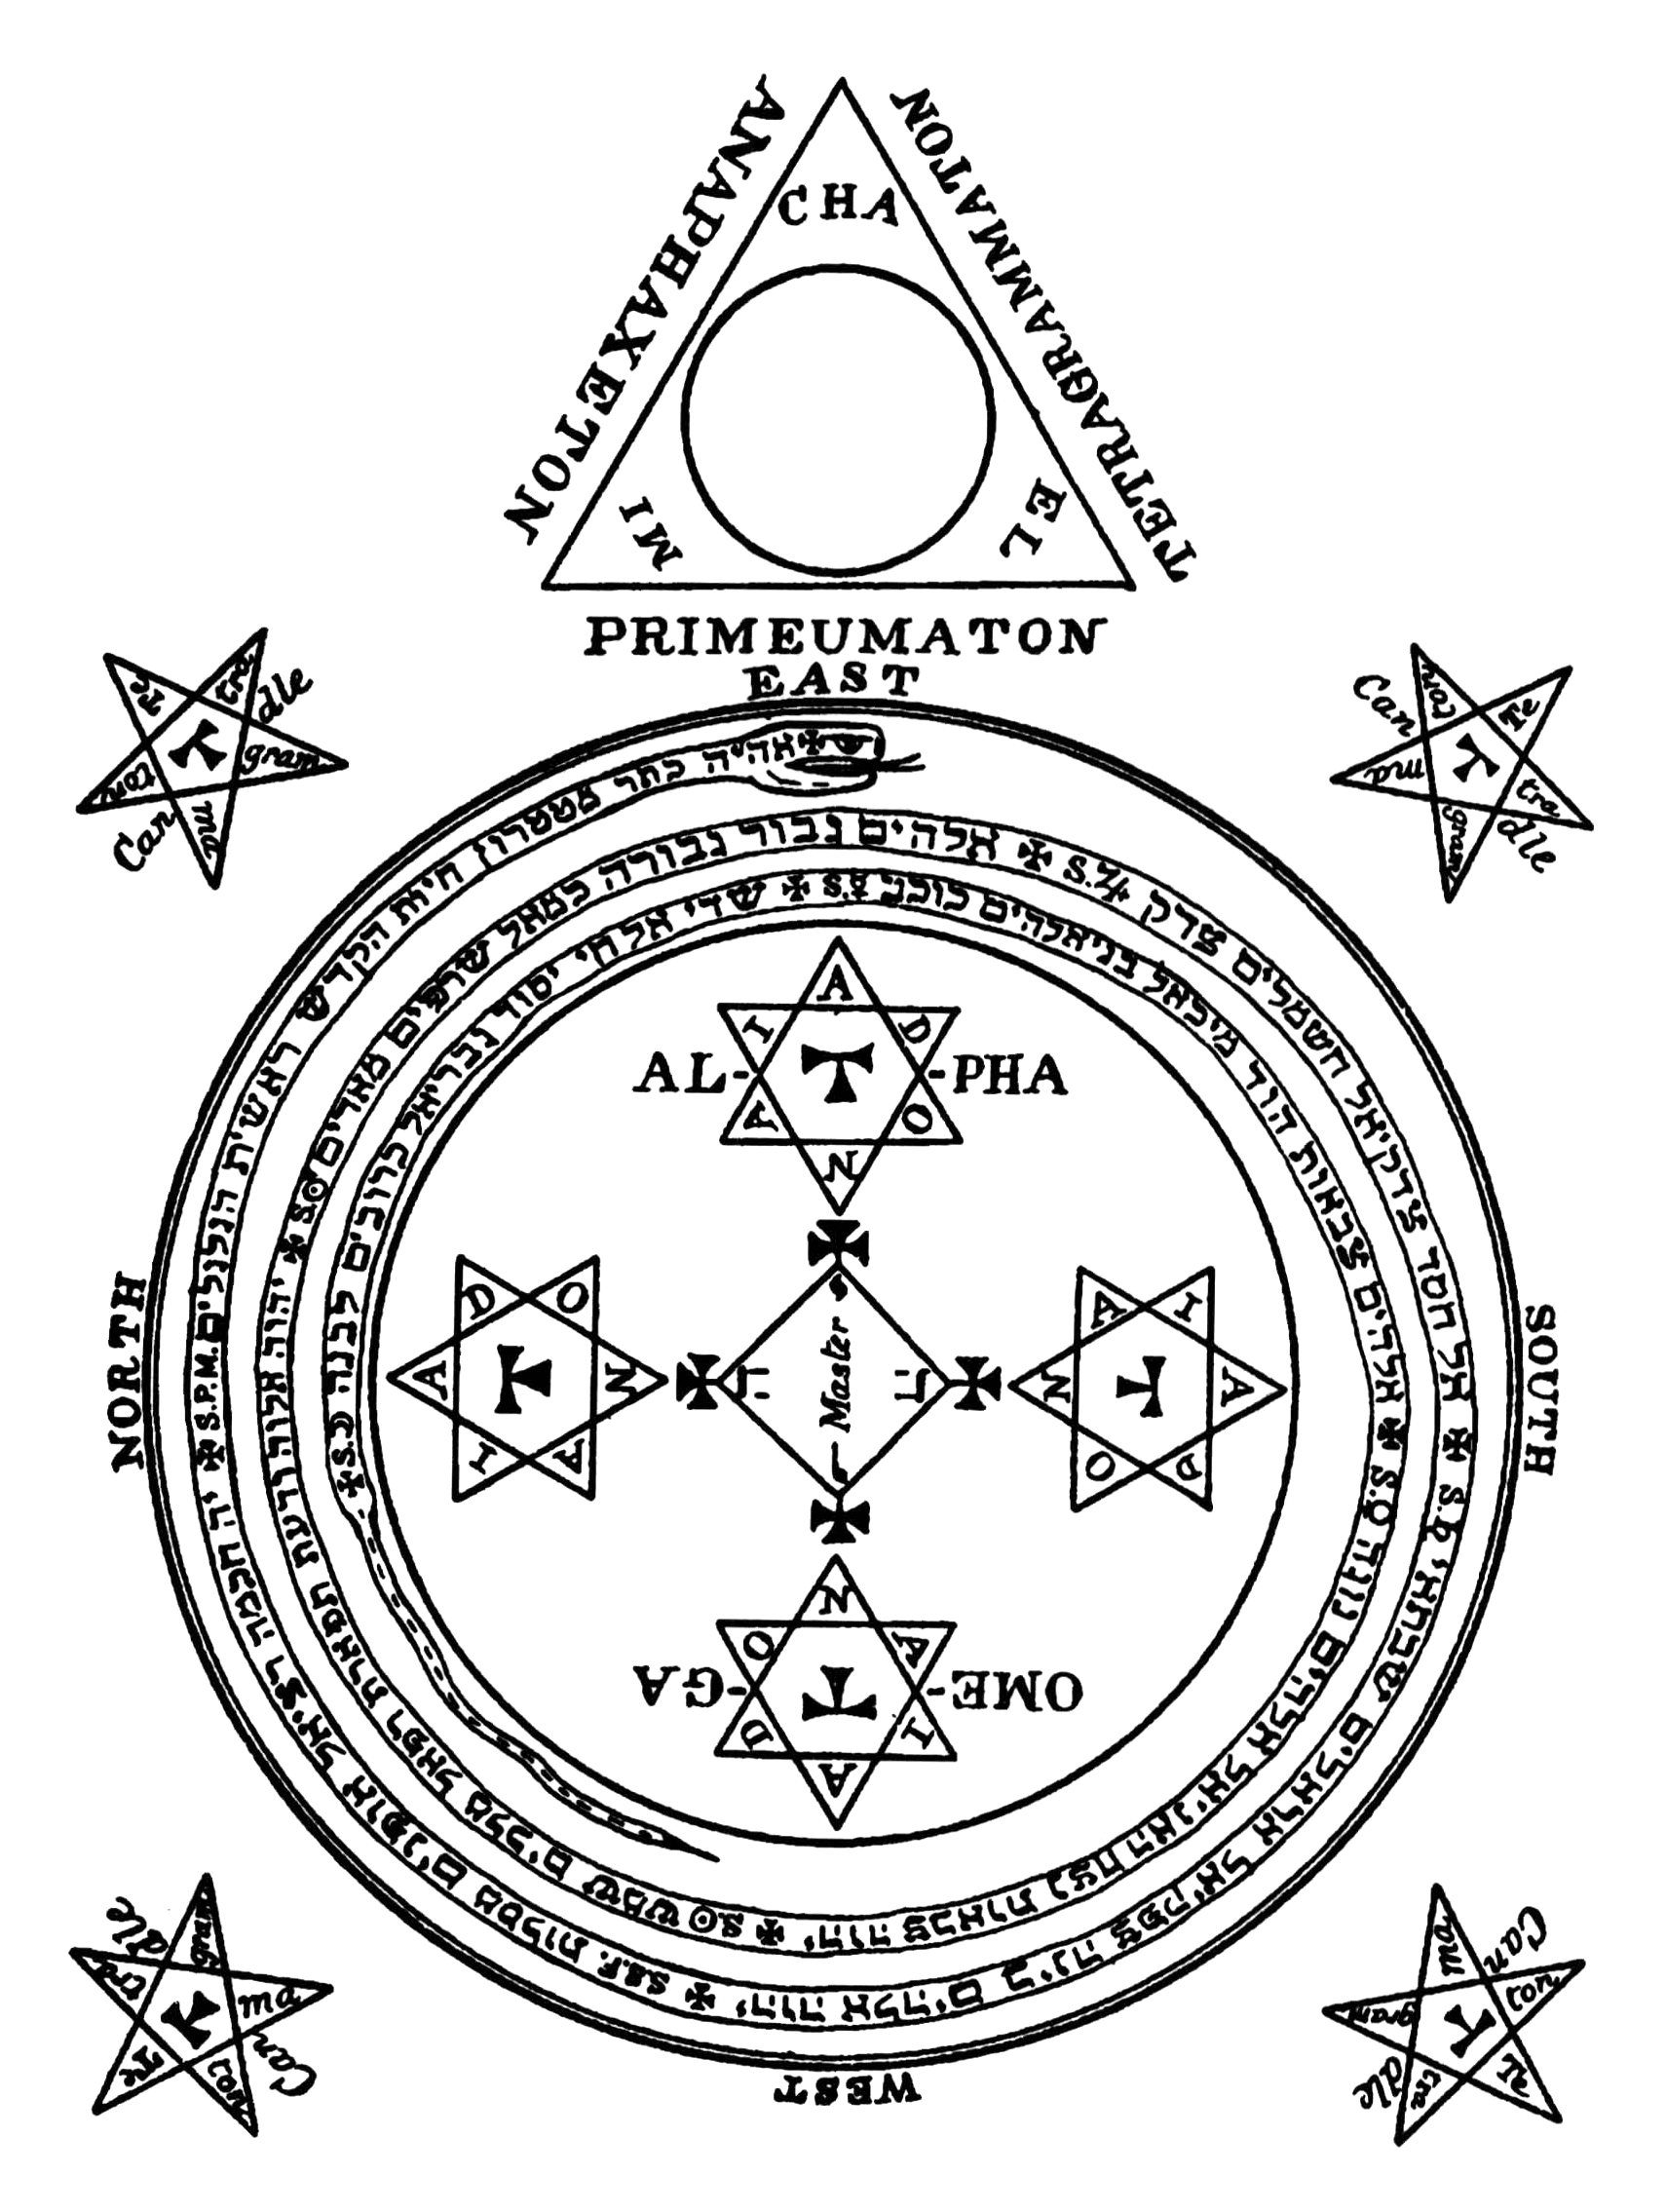 https://upload.wikimedia.org/wikipedia/commons/a/a2/Circle_of_Solomon_and_Triangle_of_Solomon_from_The_Lesser_Key_of_Solomon.png